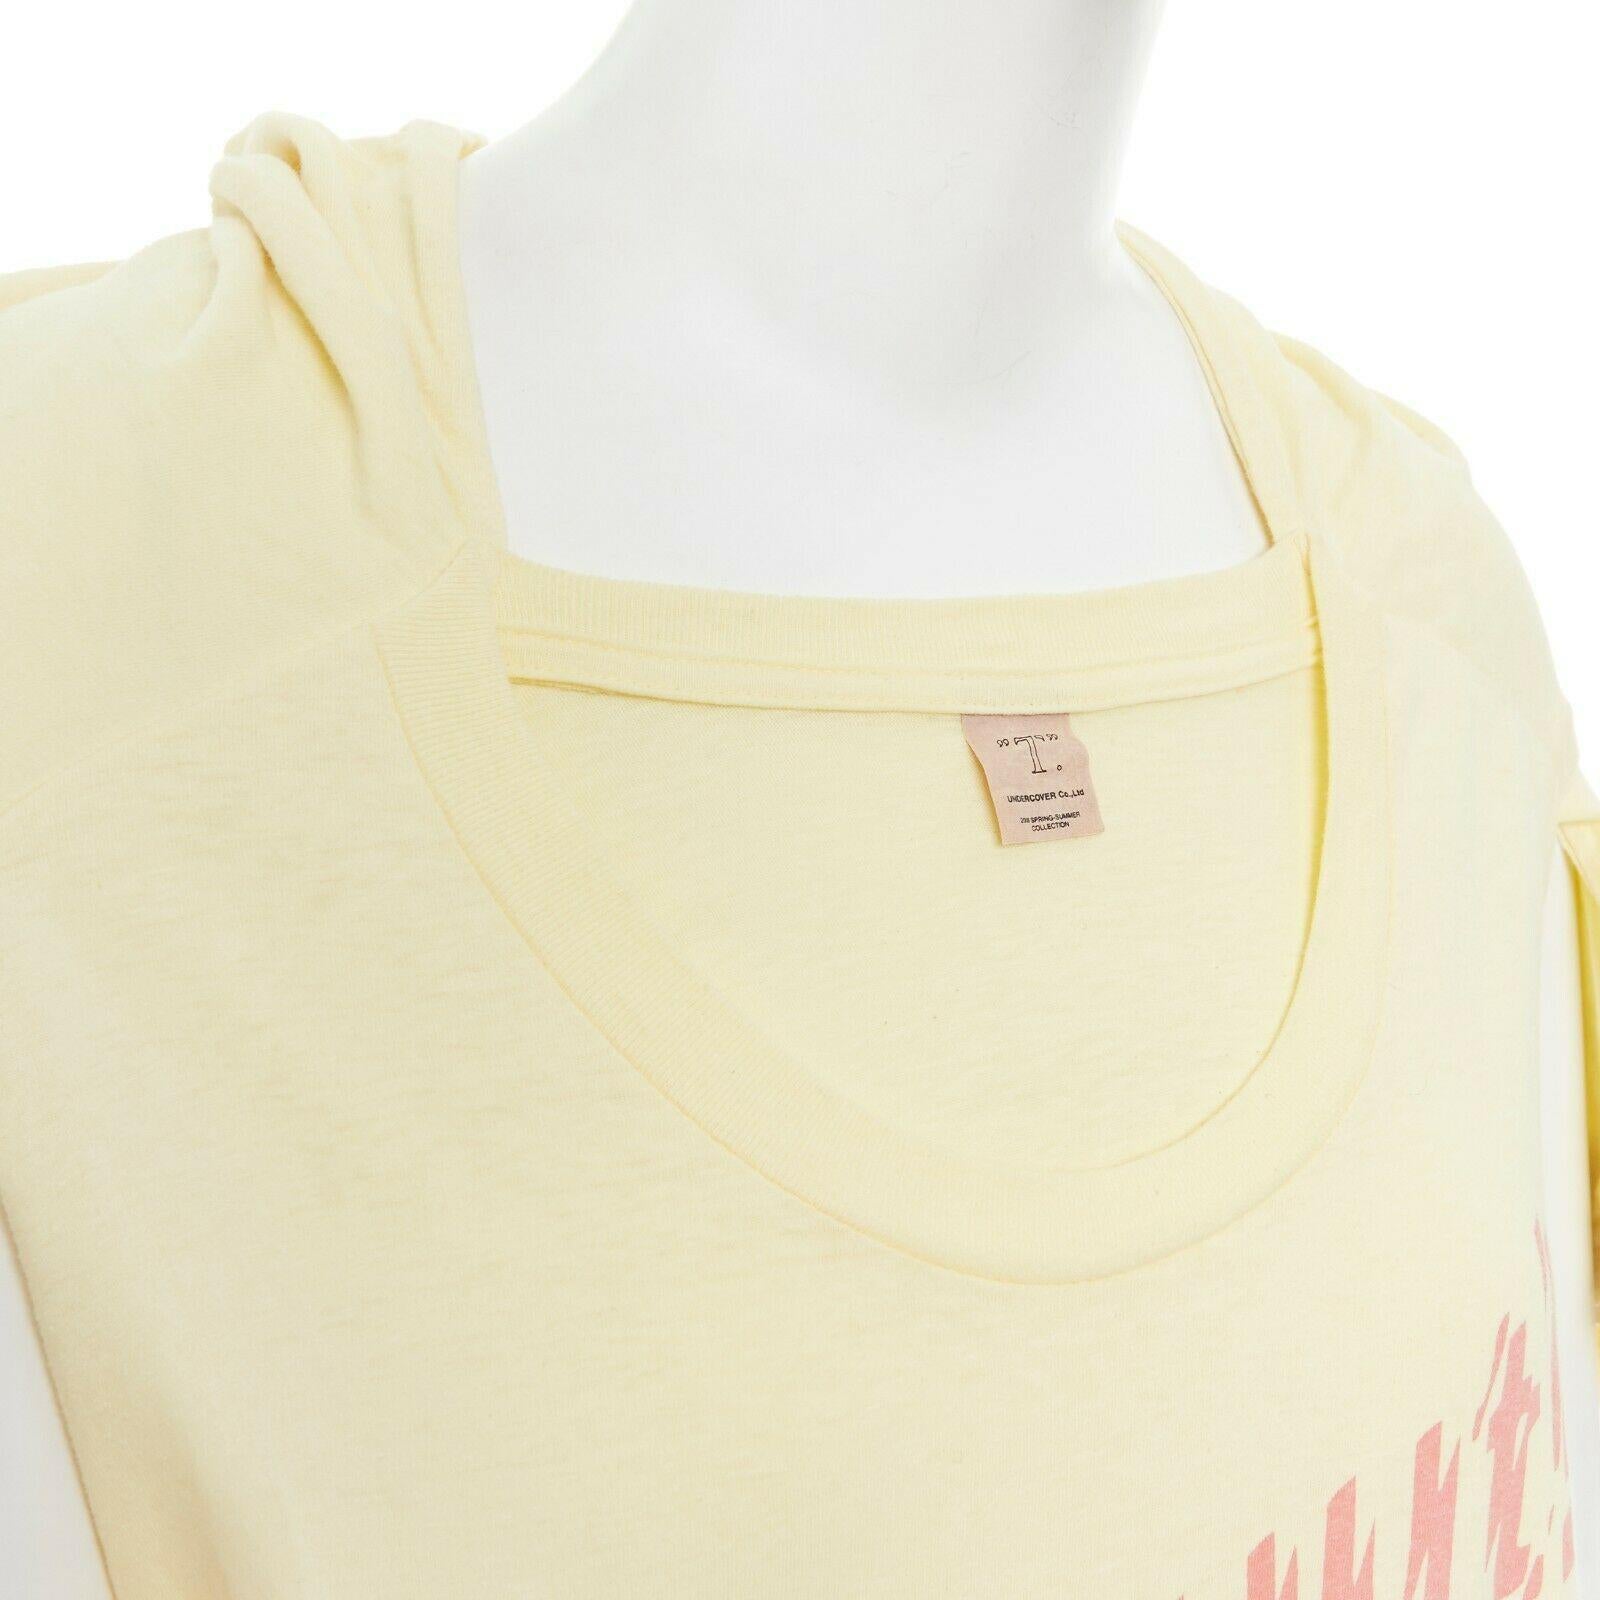 new UNDERCOVER Chuut! print yellow cotton deconstructed  t-shirt tunic top JP2 M
UNDERCOVER
100% cotton. Pale yellow. 
Deconstructed and reconstructed from two t-shirt designs. 
Designed to look like a t-shirt was laid at the front. 
Short sleeves.